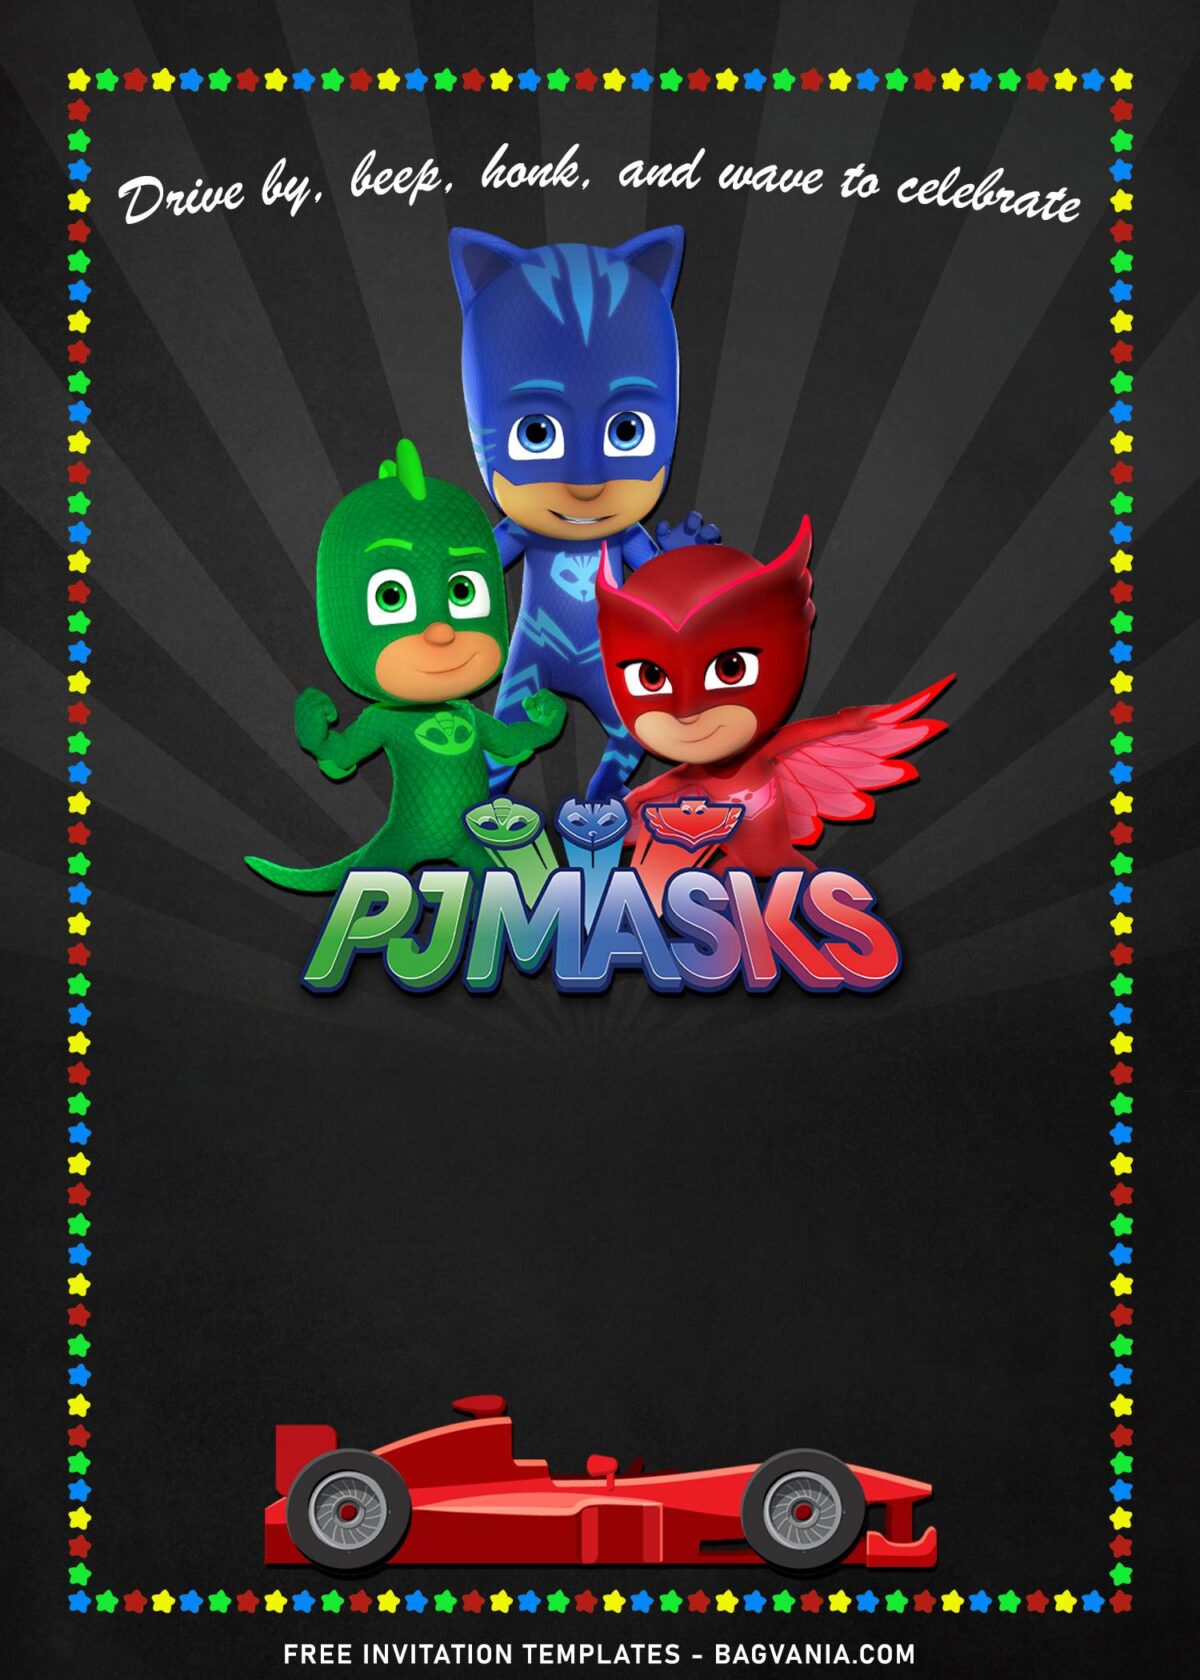 7+ Drive Honk And Wave PJ Masks Birthday Invitation Templates with Catboy